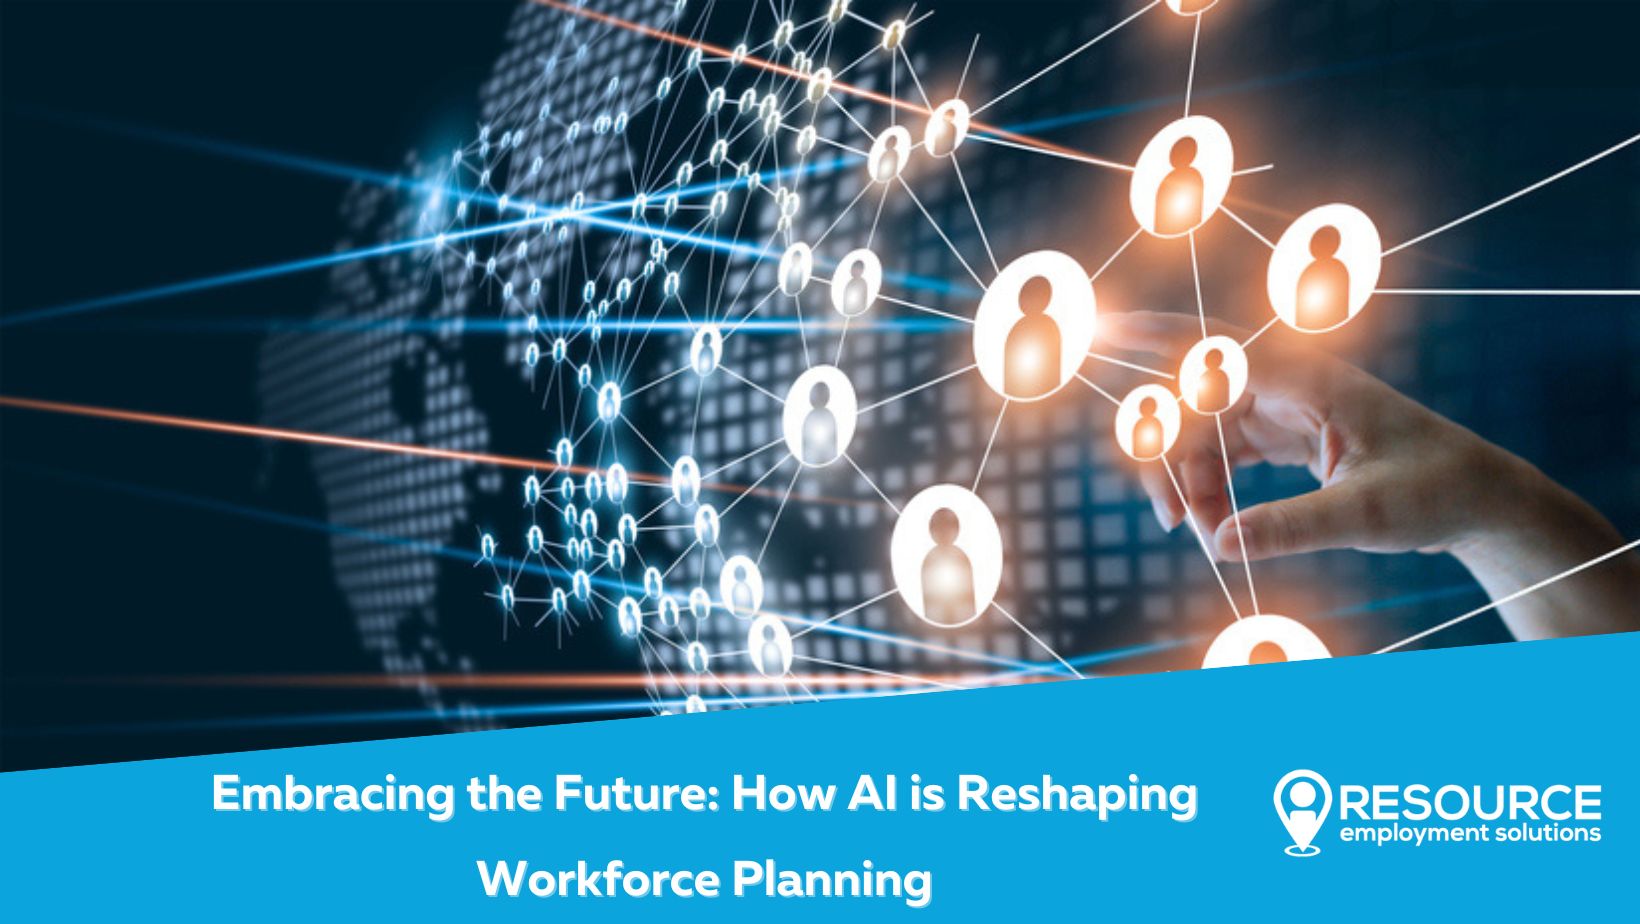 Embracing the Future: How AI is Reshaping Workforce Planning